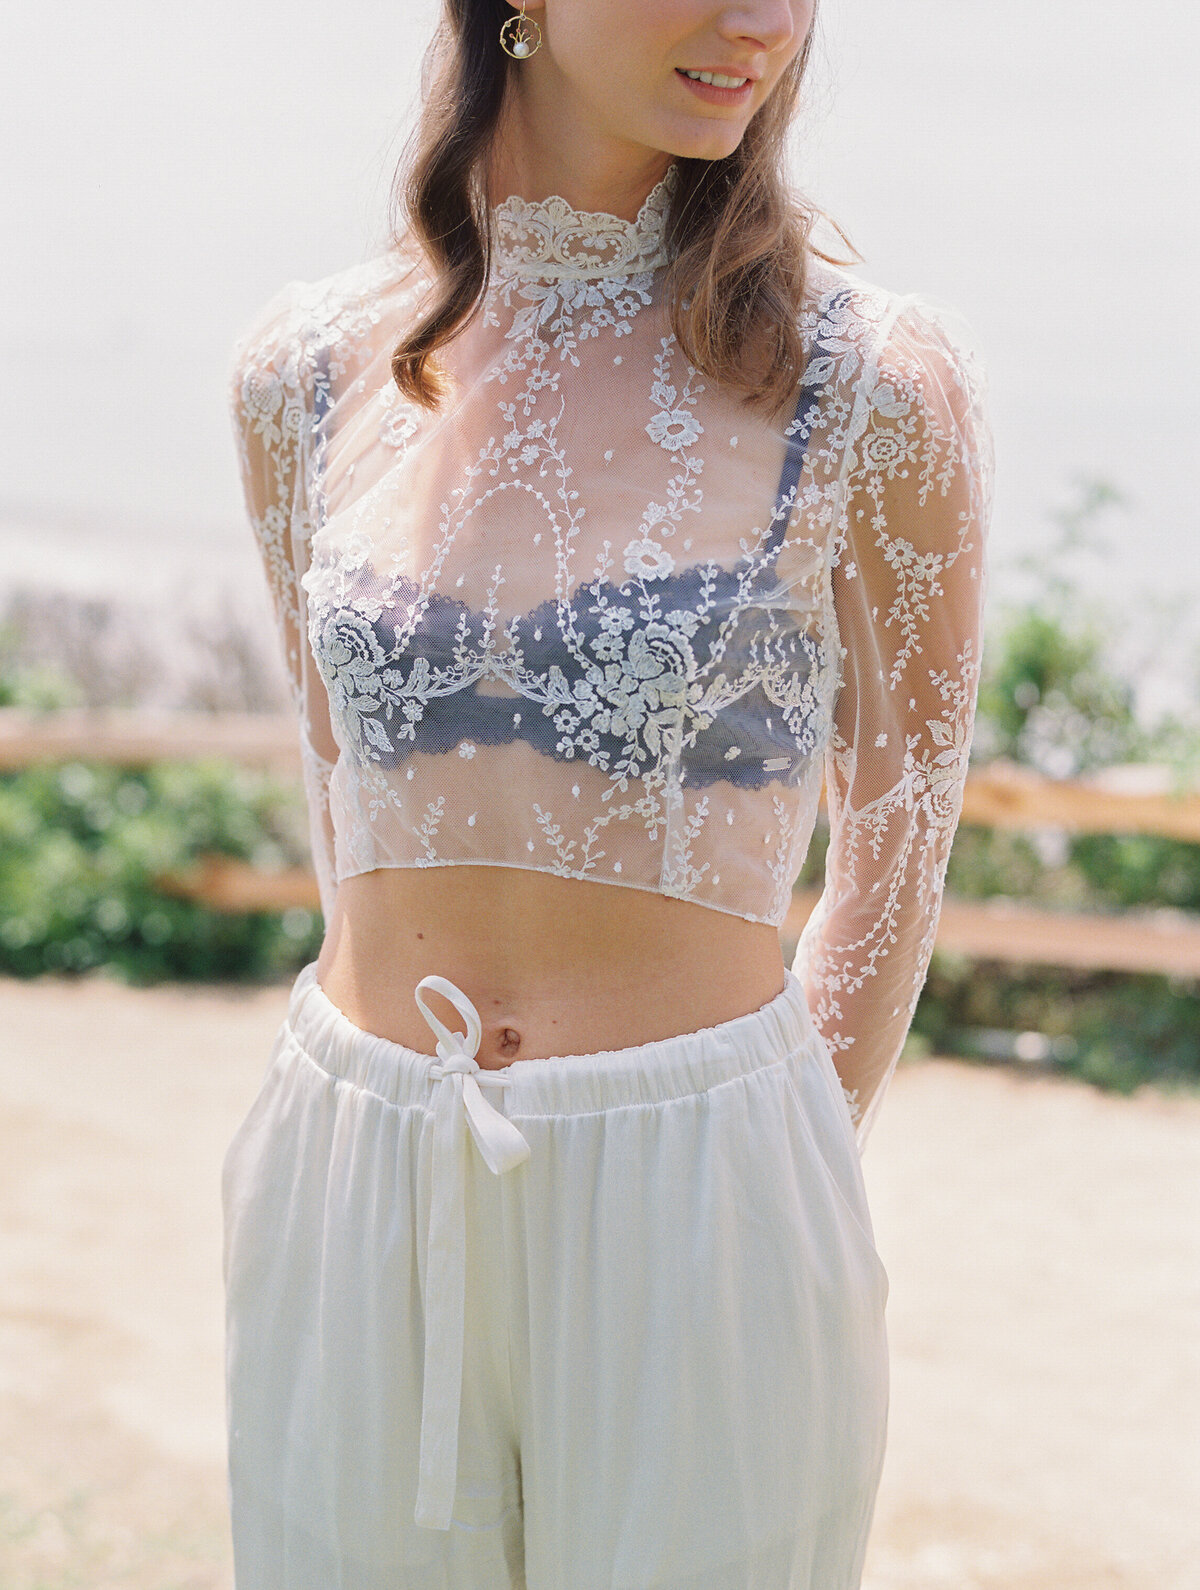 sheet lace crop top from Elizabeth Fillmore with black bra underneath